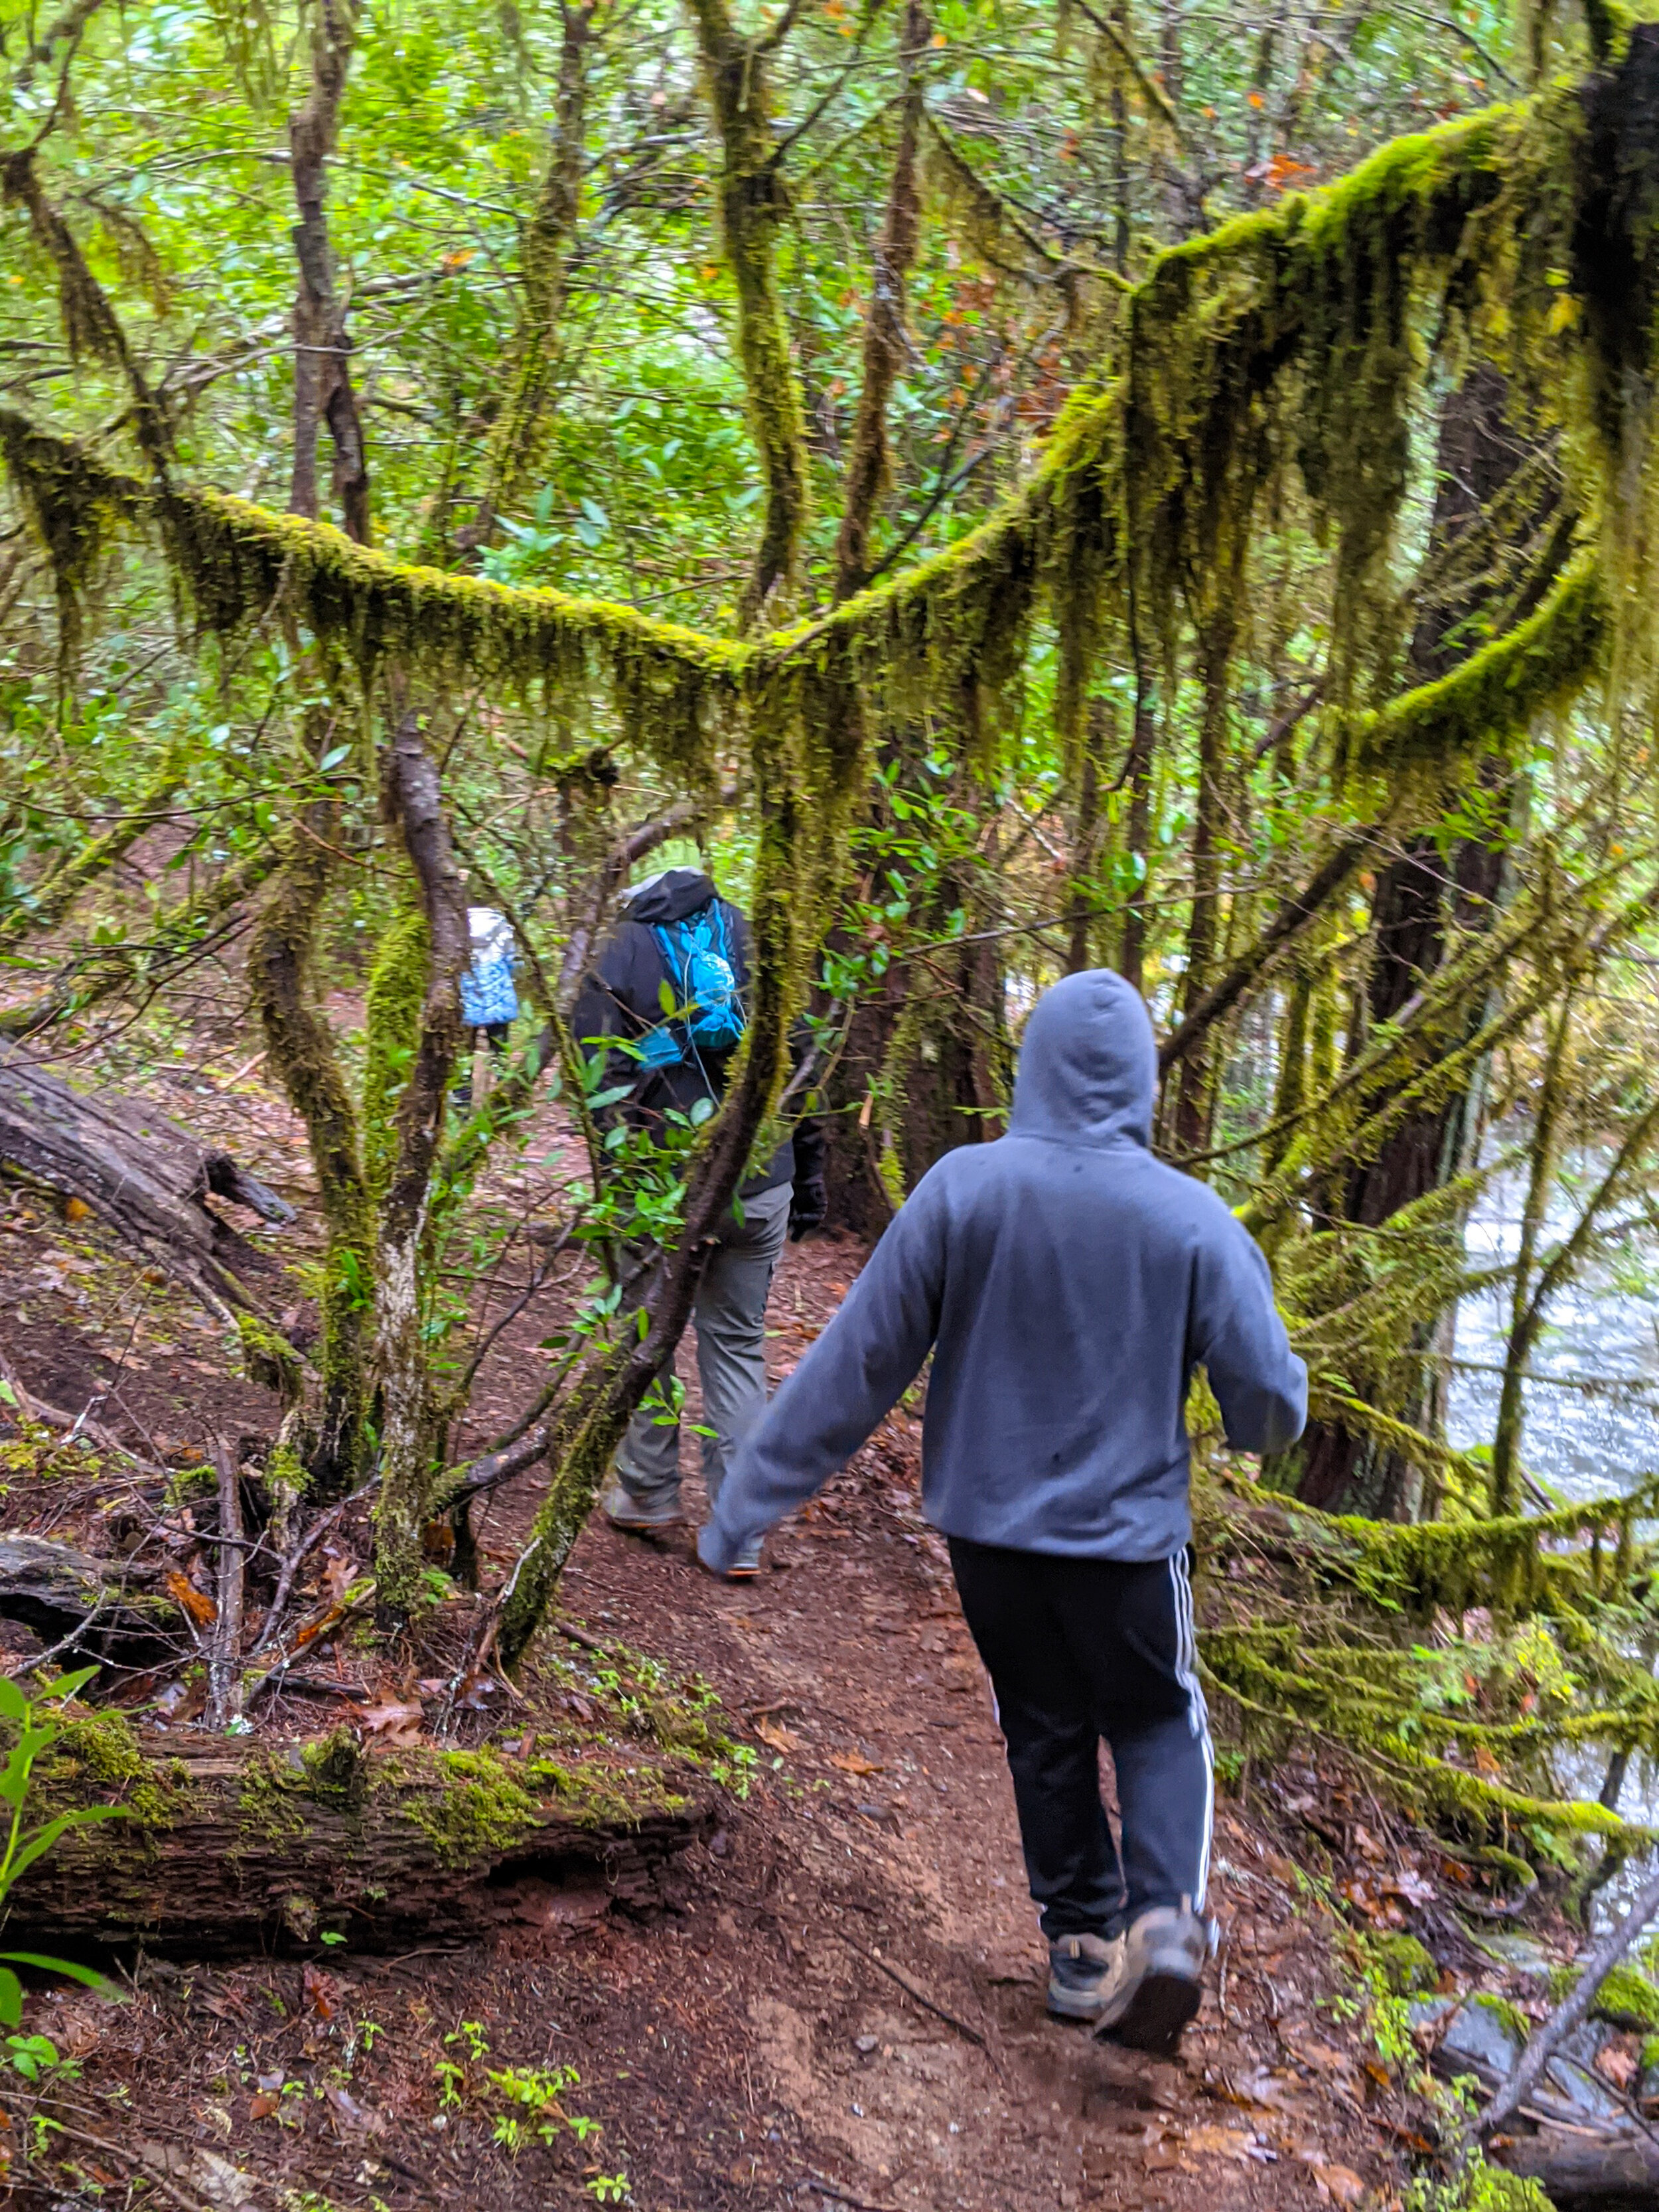 Limpy Creek Botanical Interpretive Loop Trail - Grants Pass - What to do in Southern Oregon - Hikes